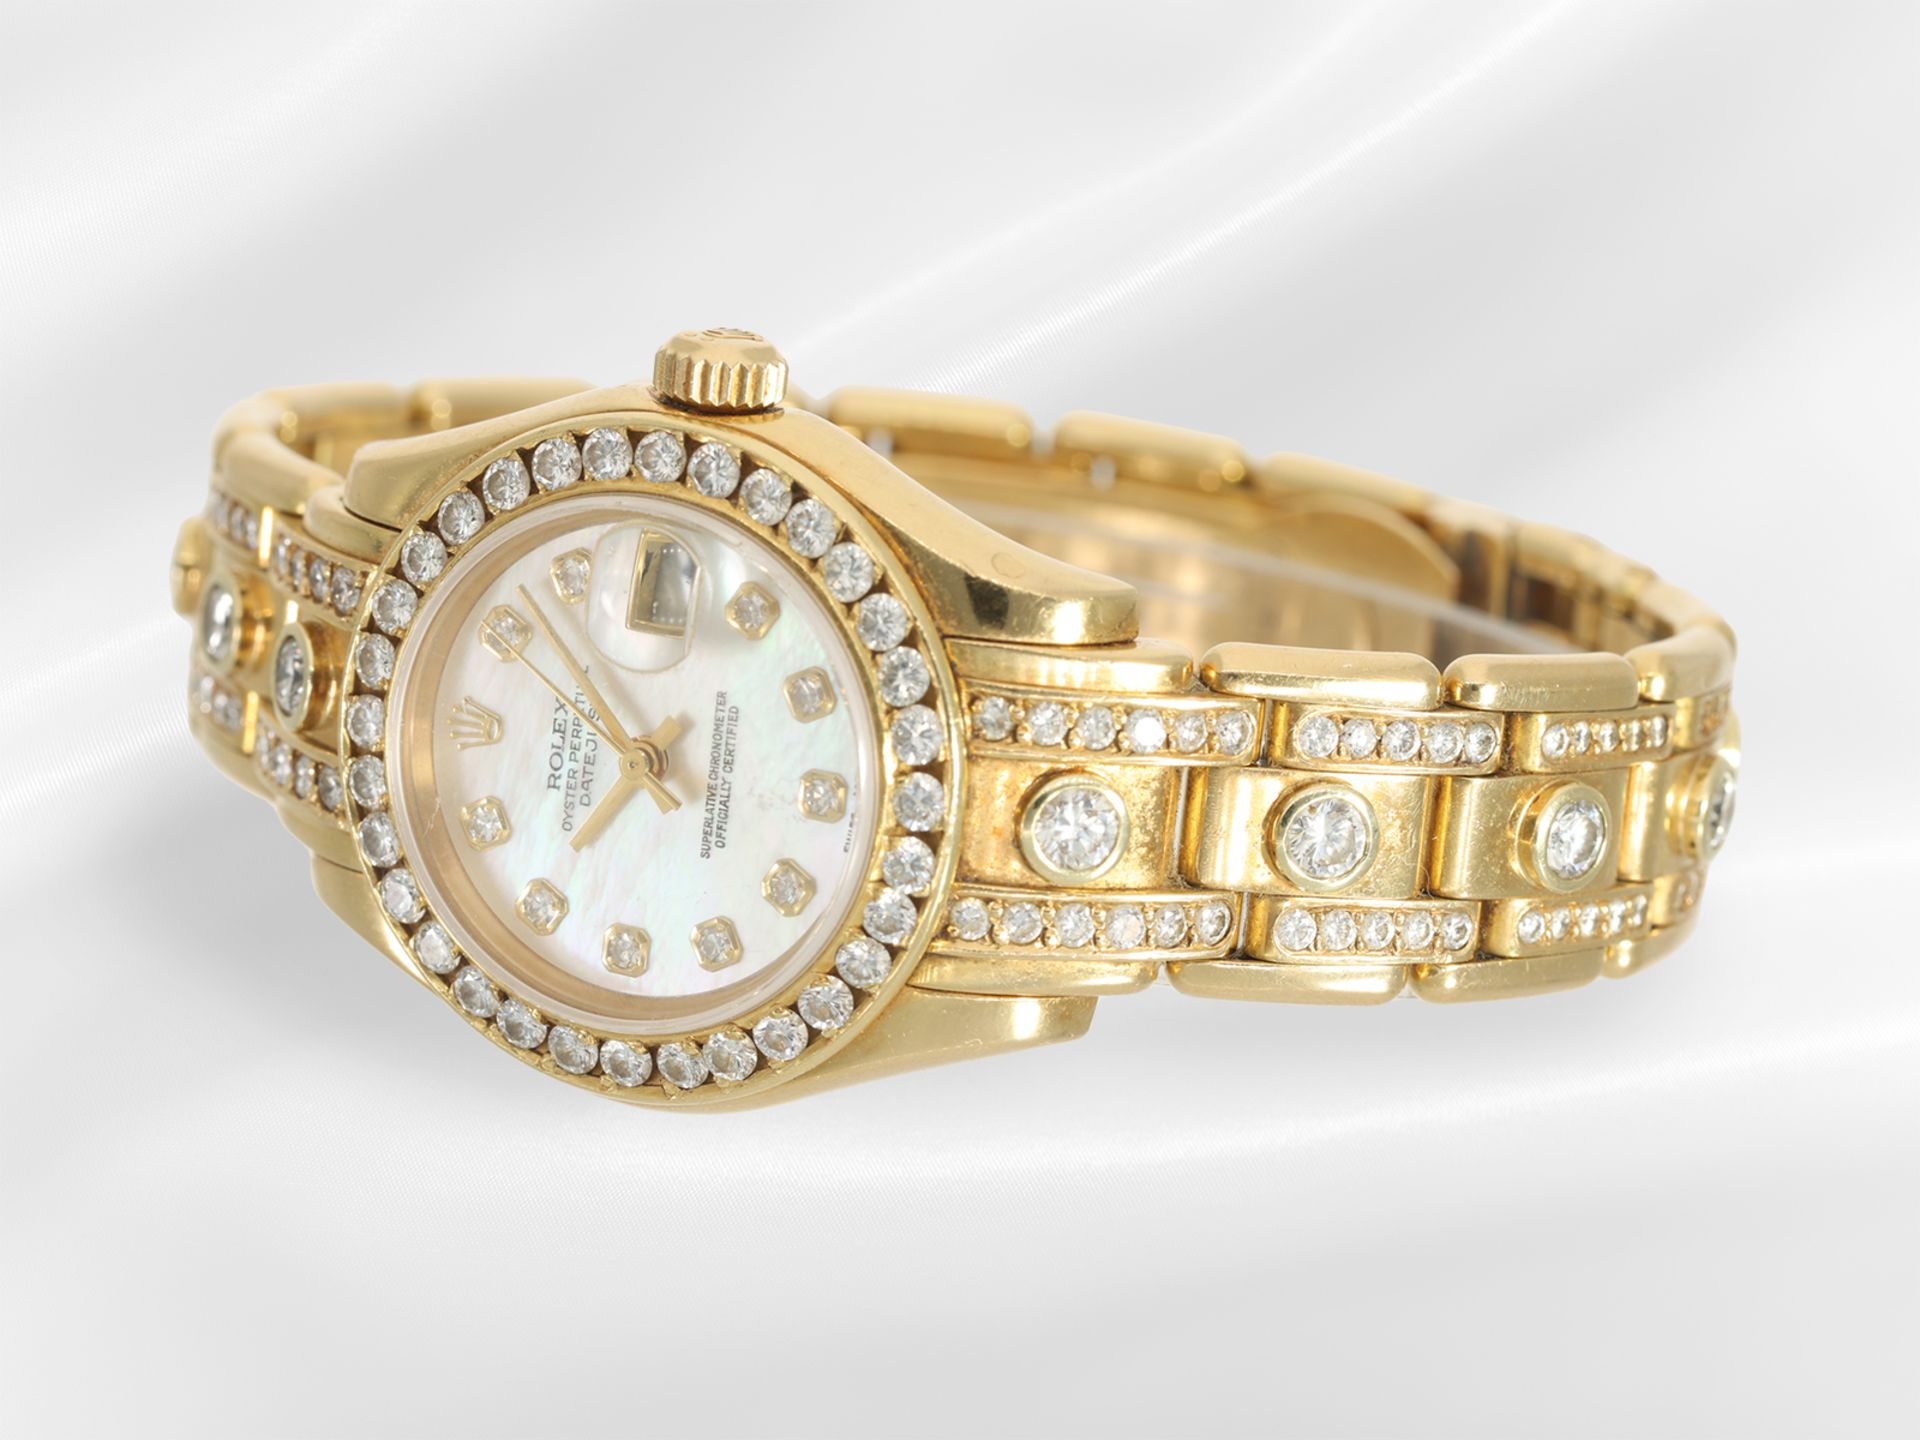 Wristwatch: wanted luxury ladies' watch Rolex Pearlmaster Ref.....with full brilliant-cut diamonds a - Image 3 of 6